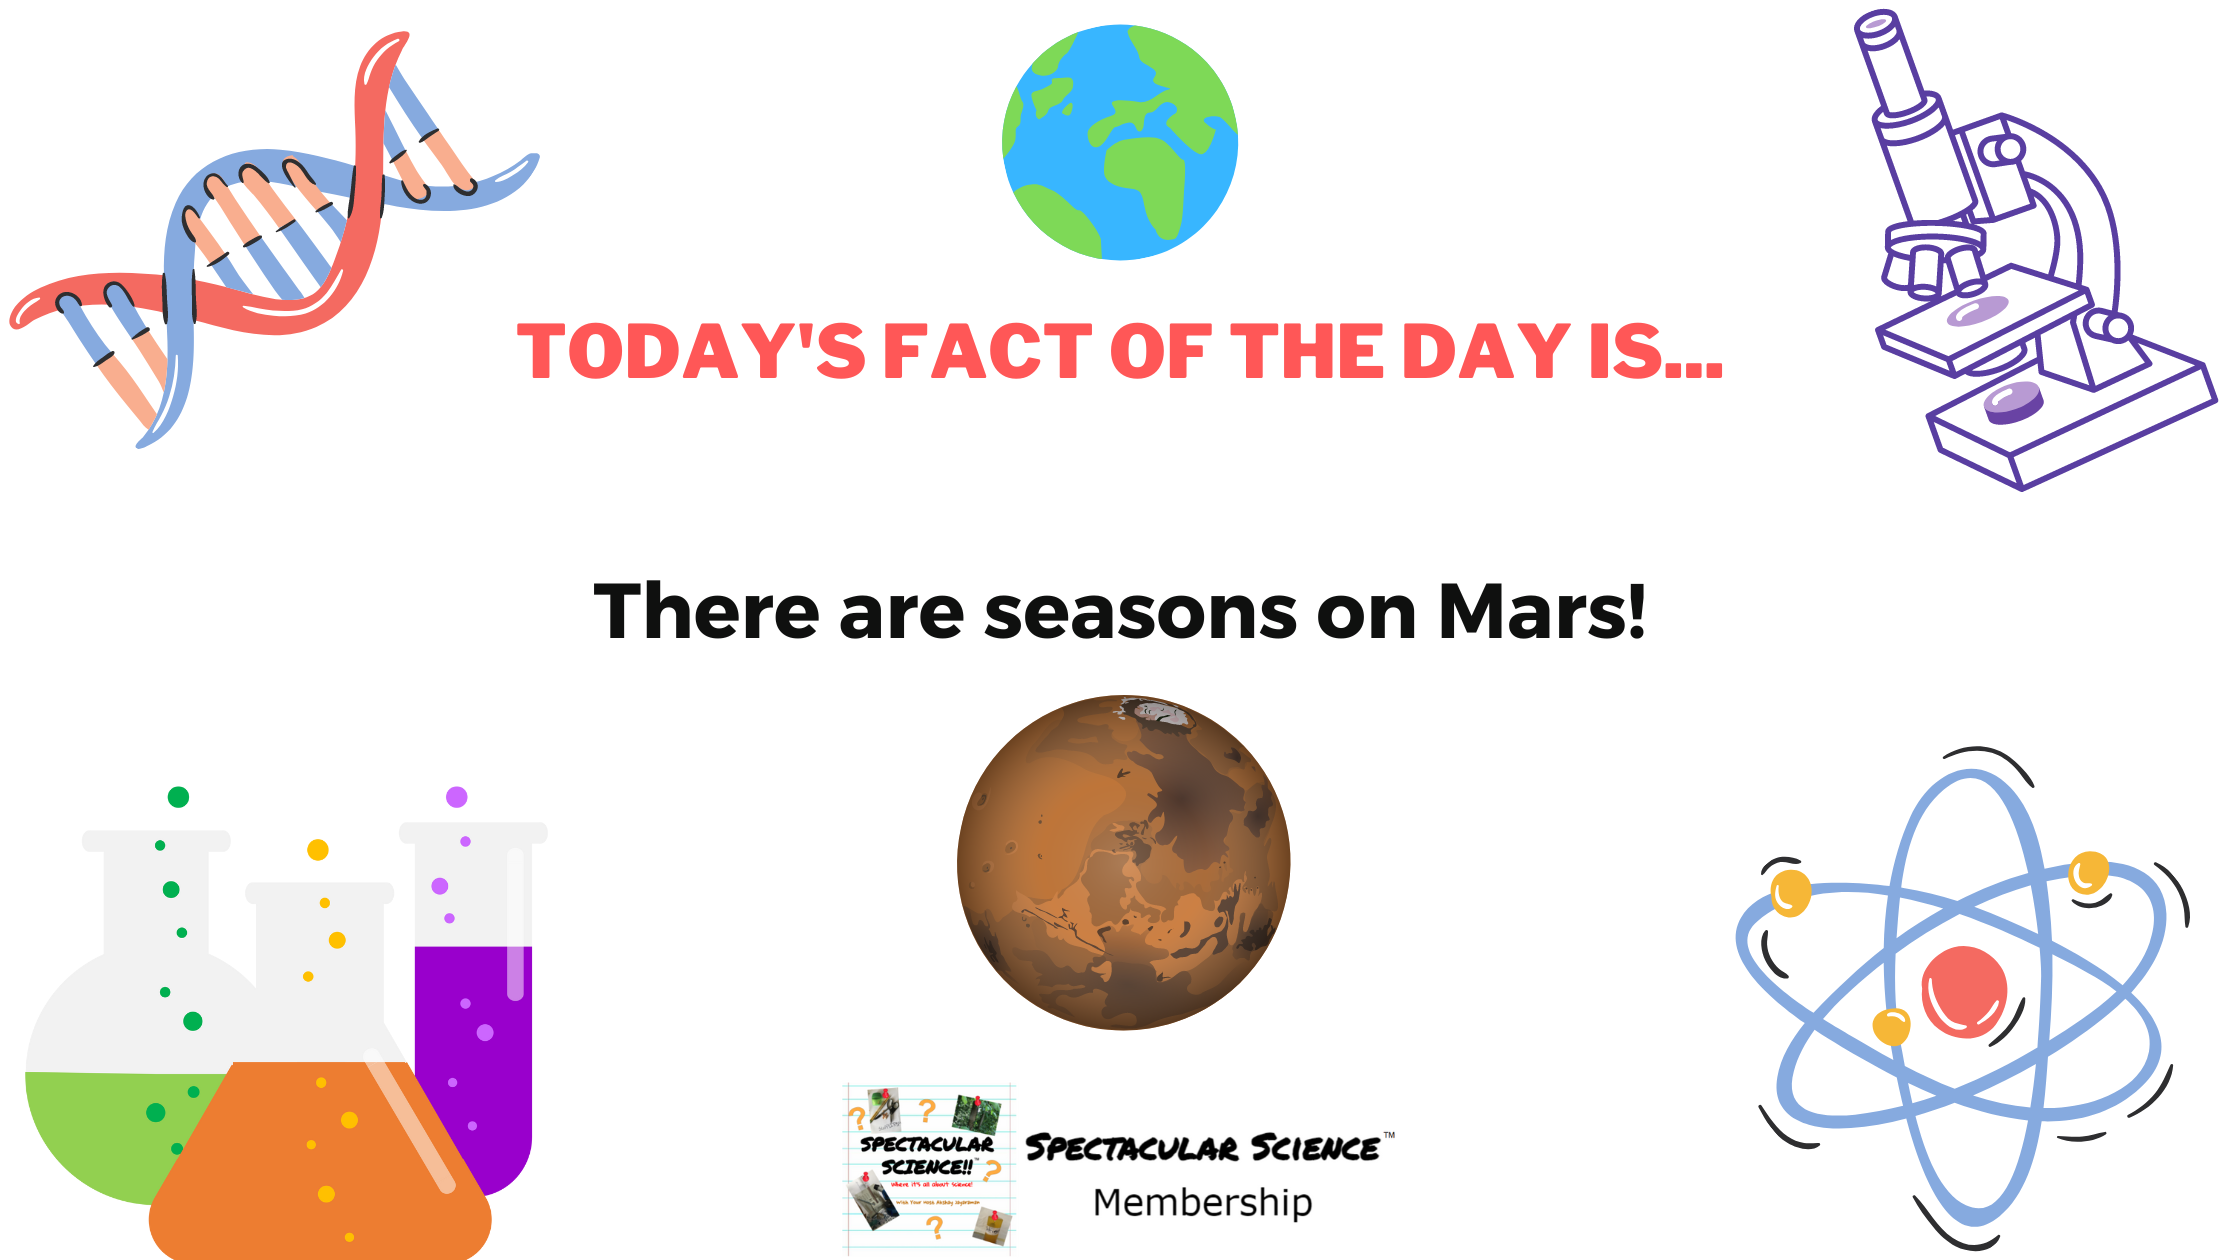 Fact of the Day Image August 10th